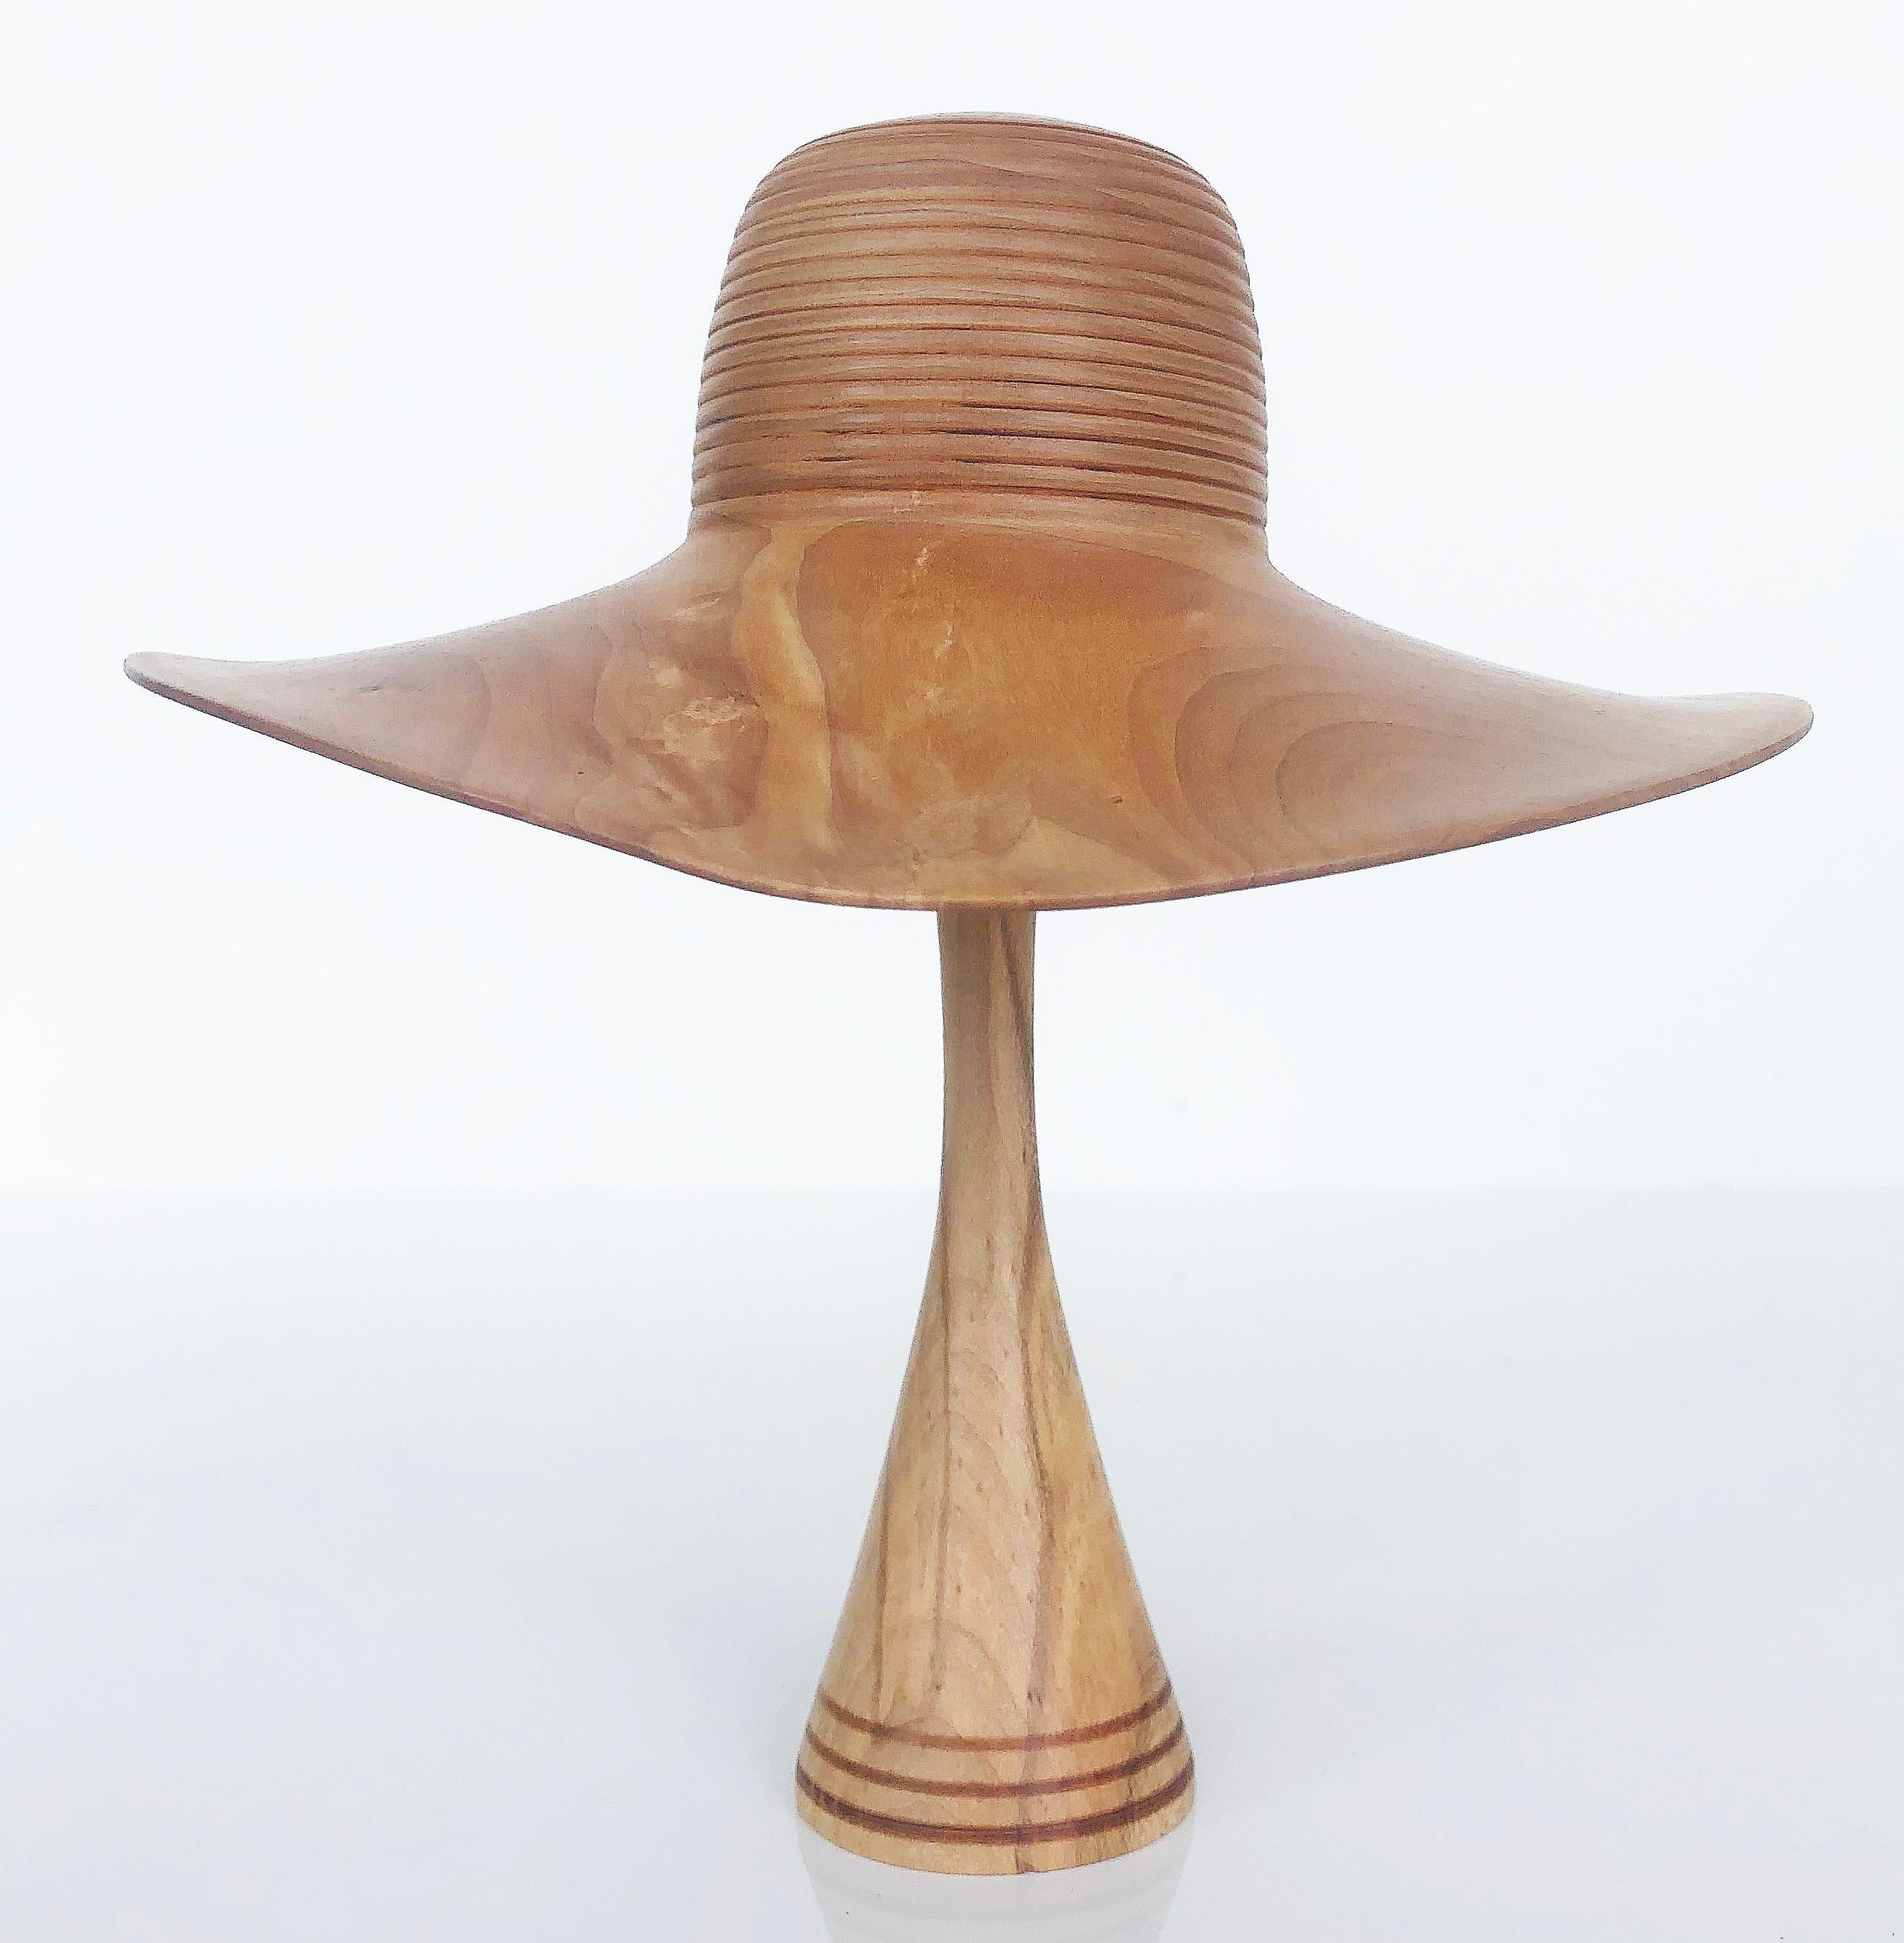  Johannes Michelsen Turned Pair of Wood Hats on Stands, Signed and Dated 7